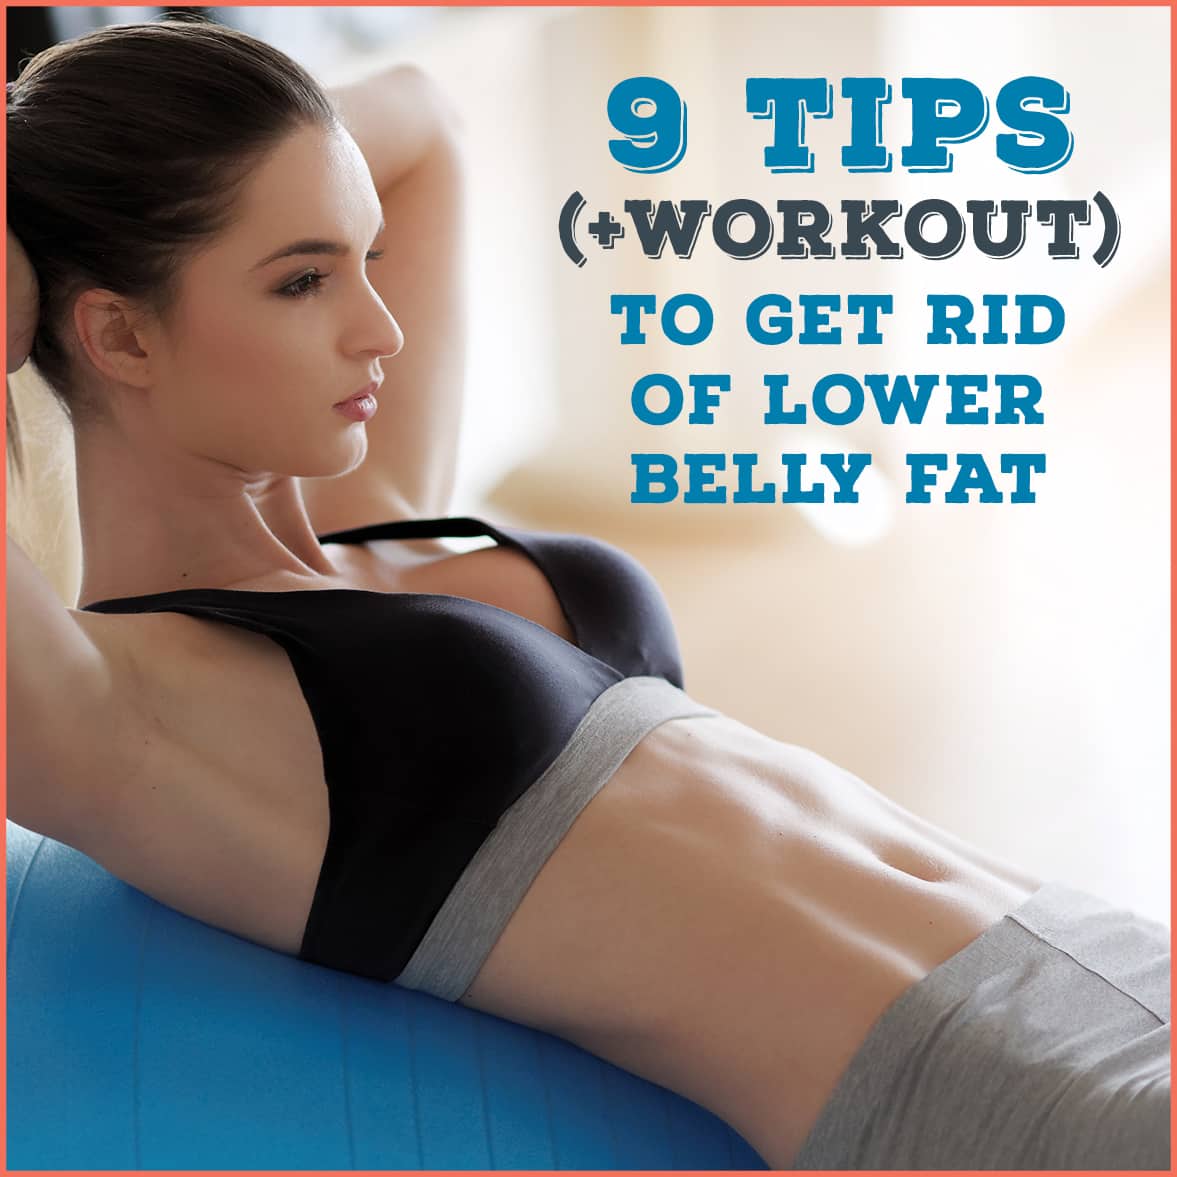 9 Tips Workout To Get Rid Of Lower Belly Fat Get Healthy U